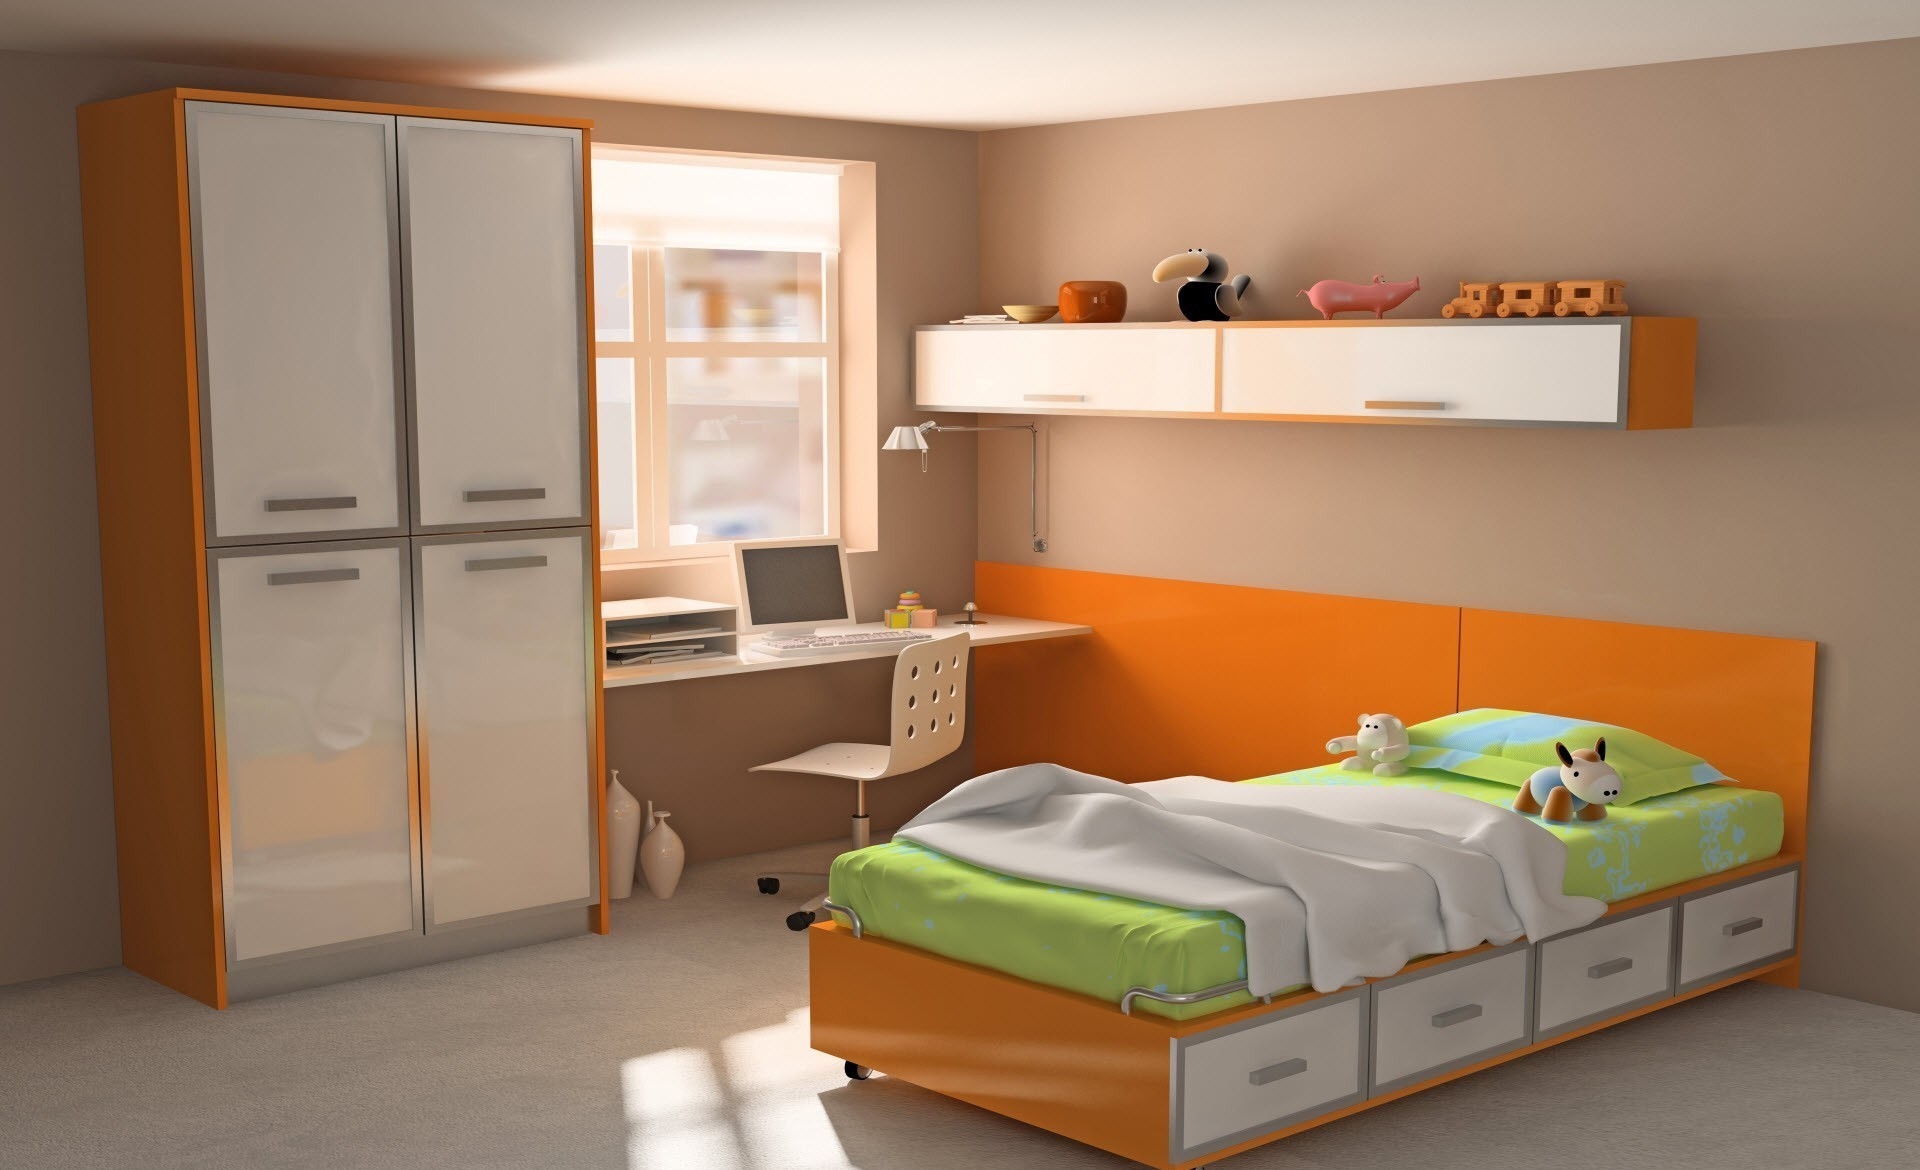 computer, cupboard, toys, interior, orange, miscellanea, miscellaneous, design, table, room, style, bed, brightly, apartment, flat, colorfully, graphically